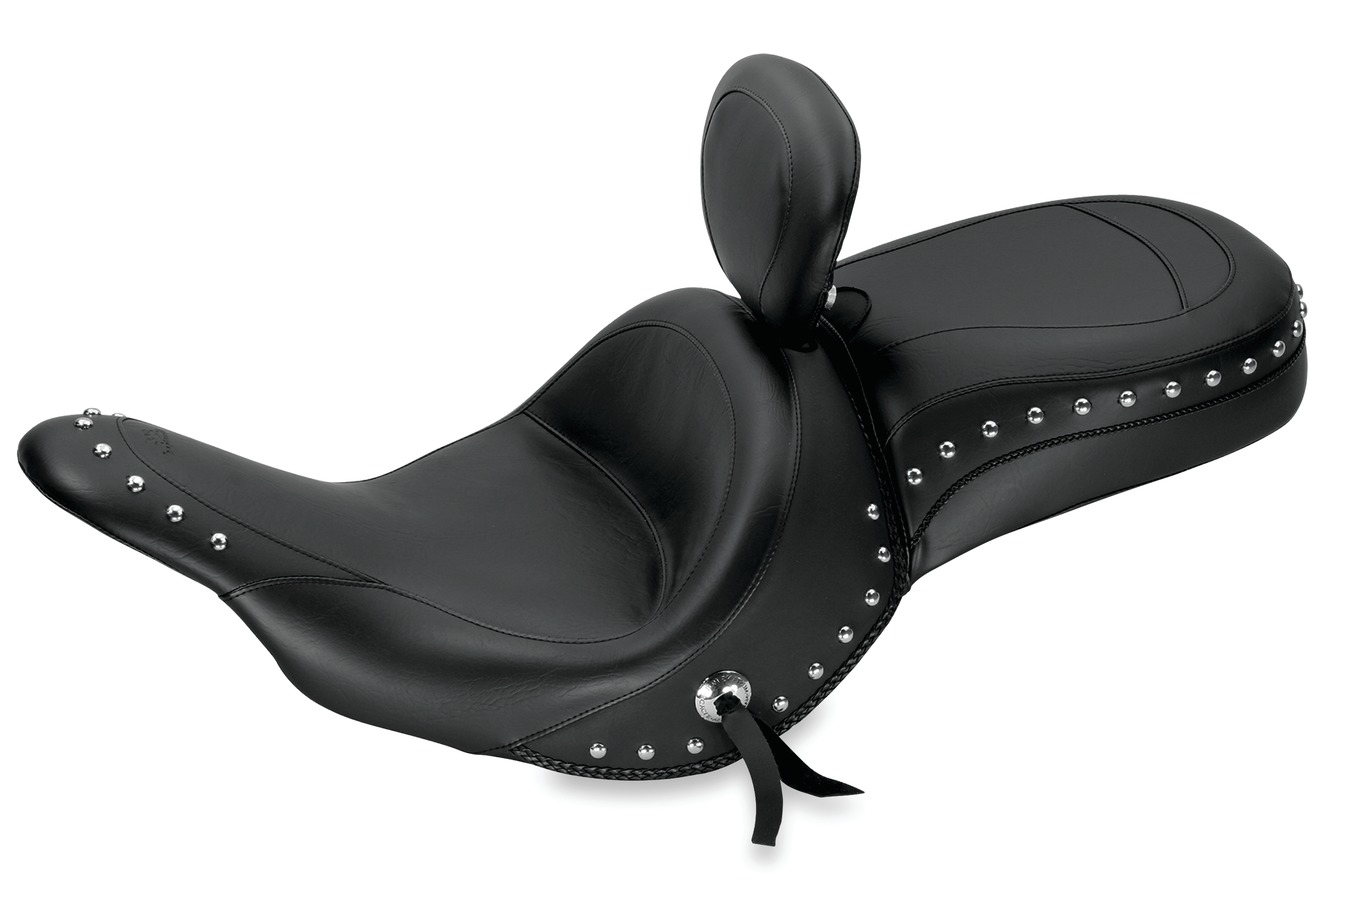 Standard Touring One-Piece Seat with Driver Backrest for Kawasaki Vulcan 1700 Vaquero 2011-